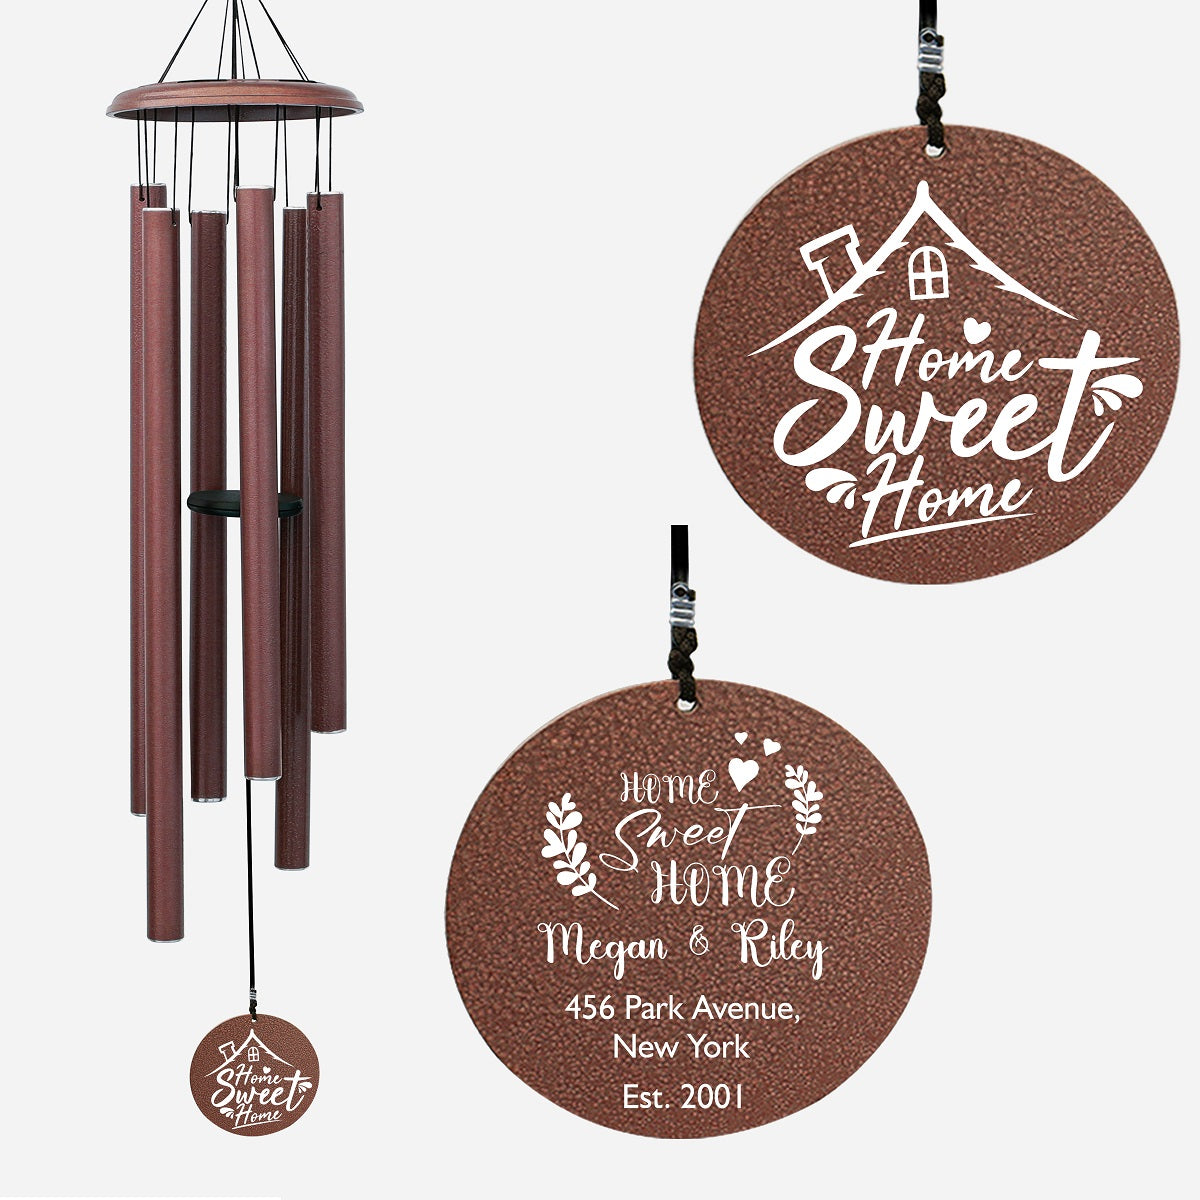 Personalized Wind Chime for Home MWC121